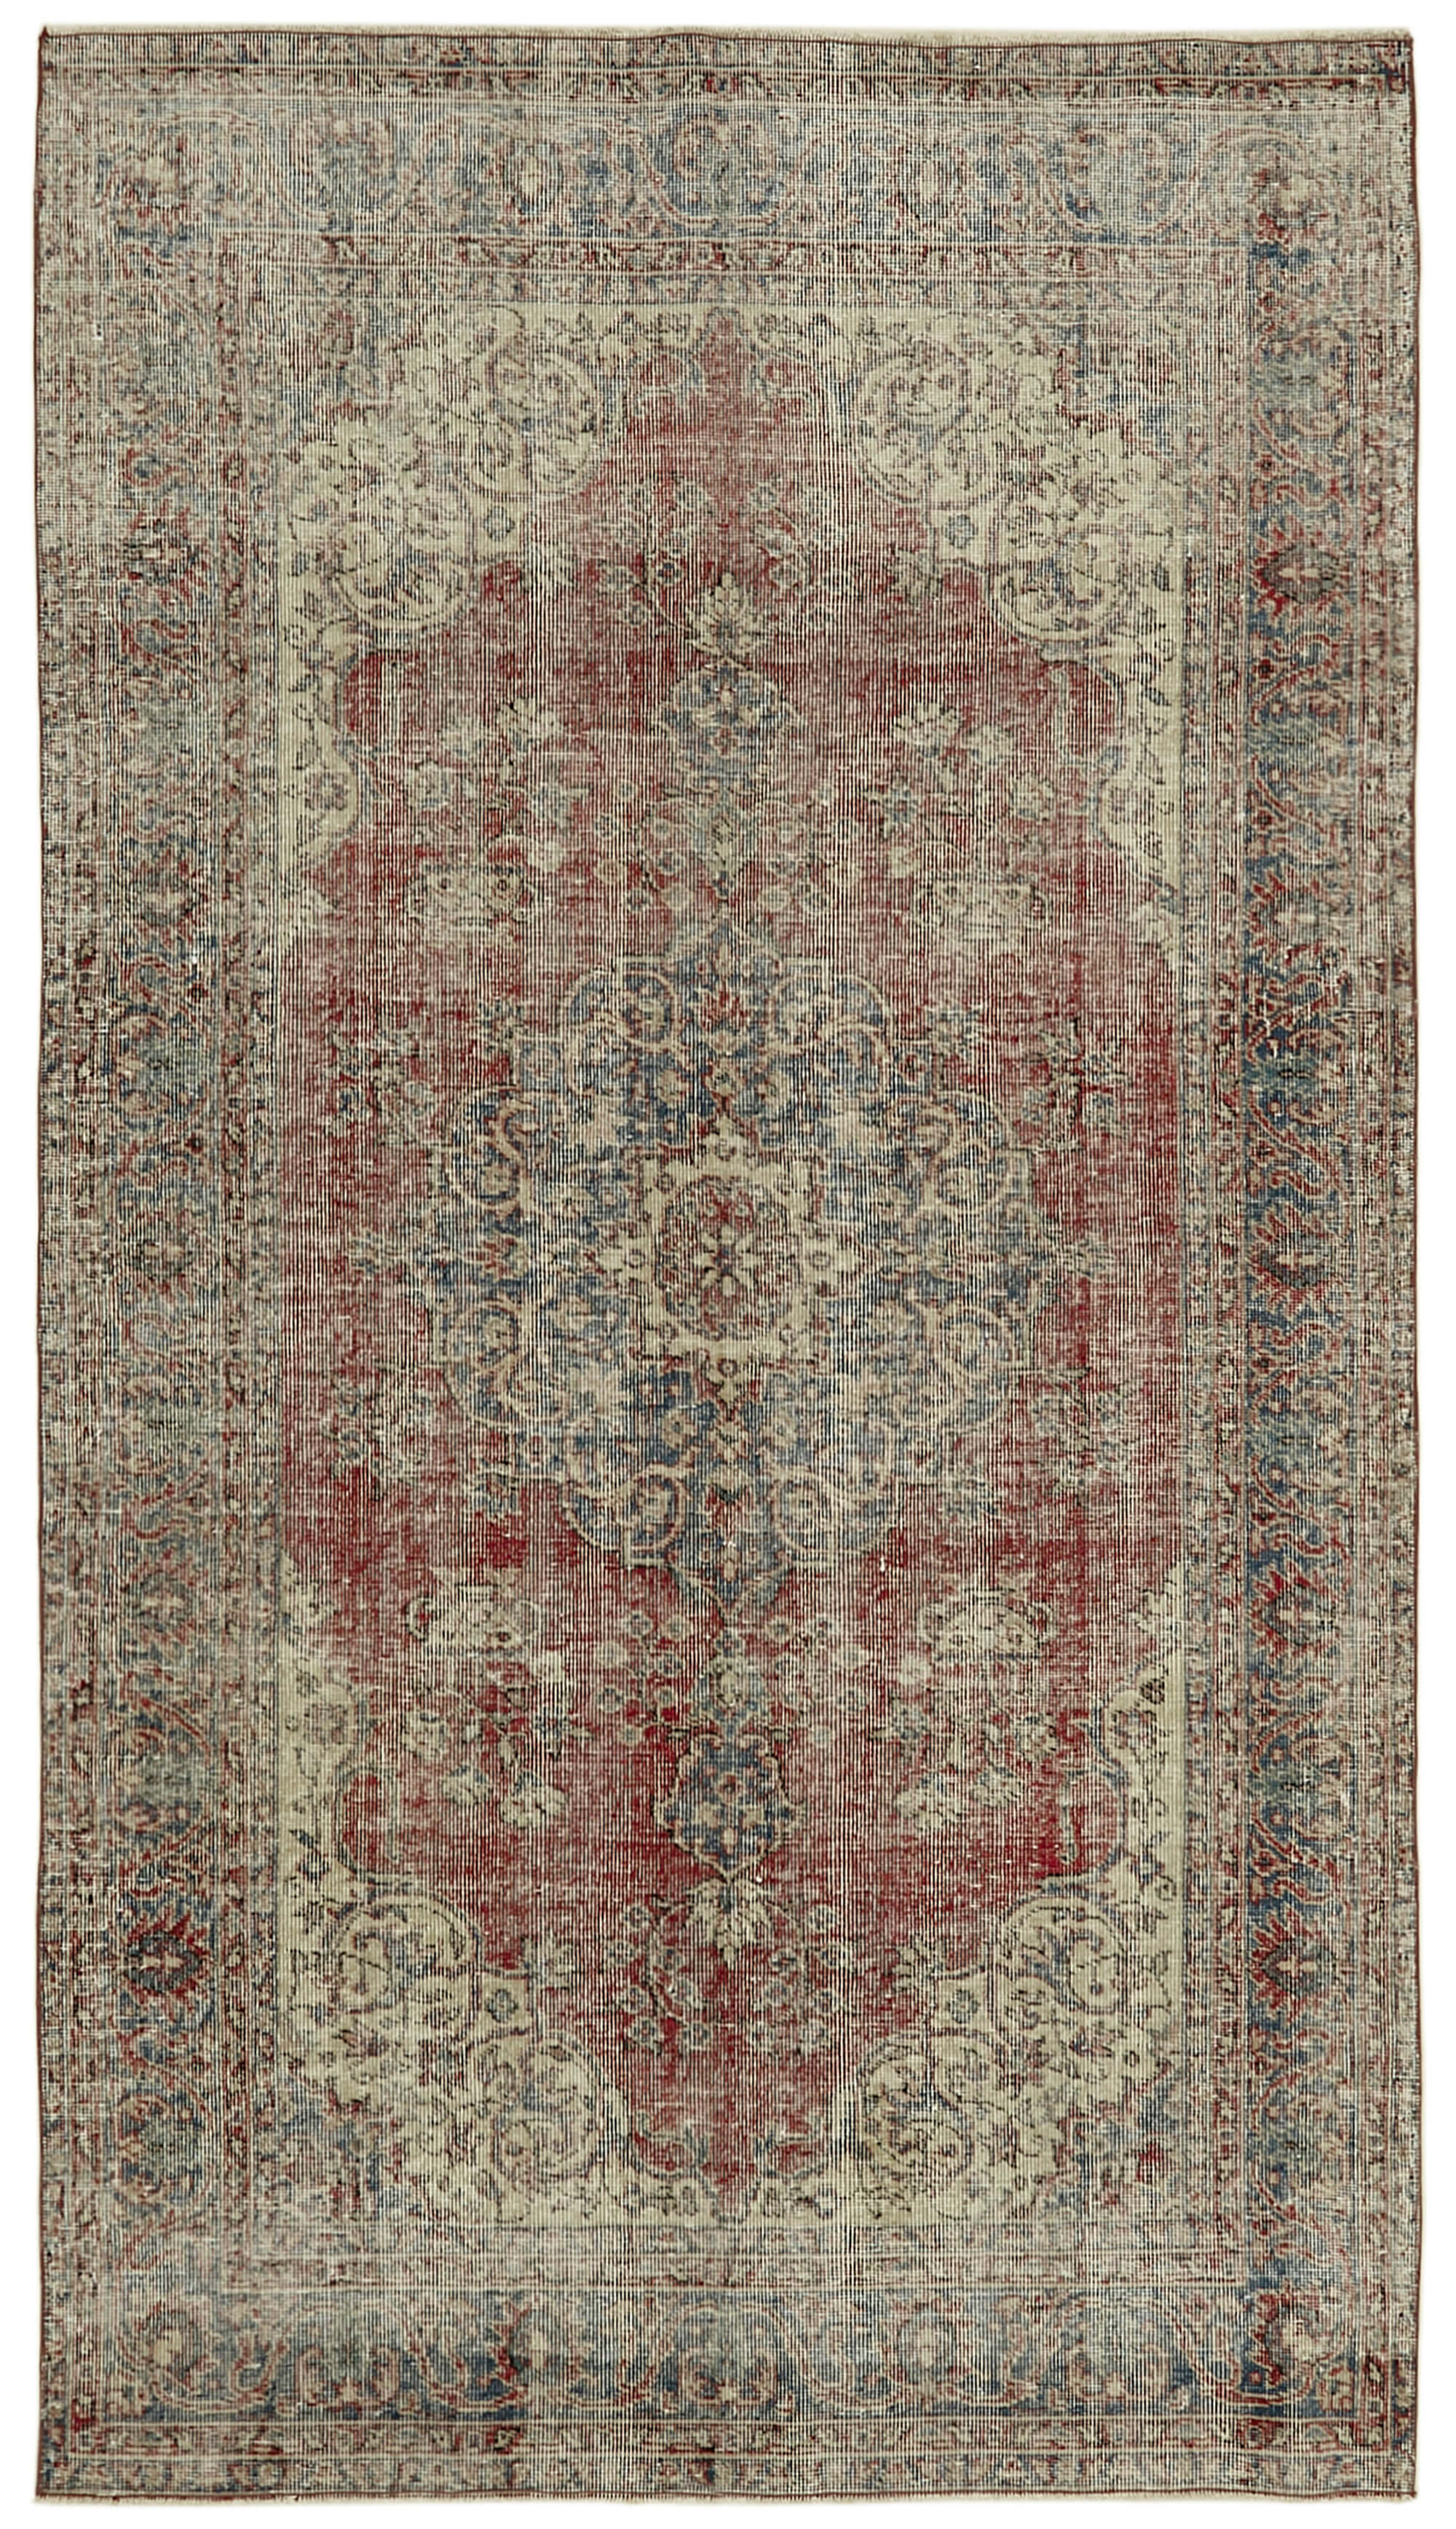 Handmade White Wash Area Rug > Design# OL-AC-41653 > Size: 4'-7" x 8'-1", Carpet Culture Rugs, Handmade Rugs, NYC Rugs, New Rugs, Shop Rugs, Rug Store, Outlet Rugs, SoHo Rugs, Rugs in USA